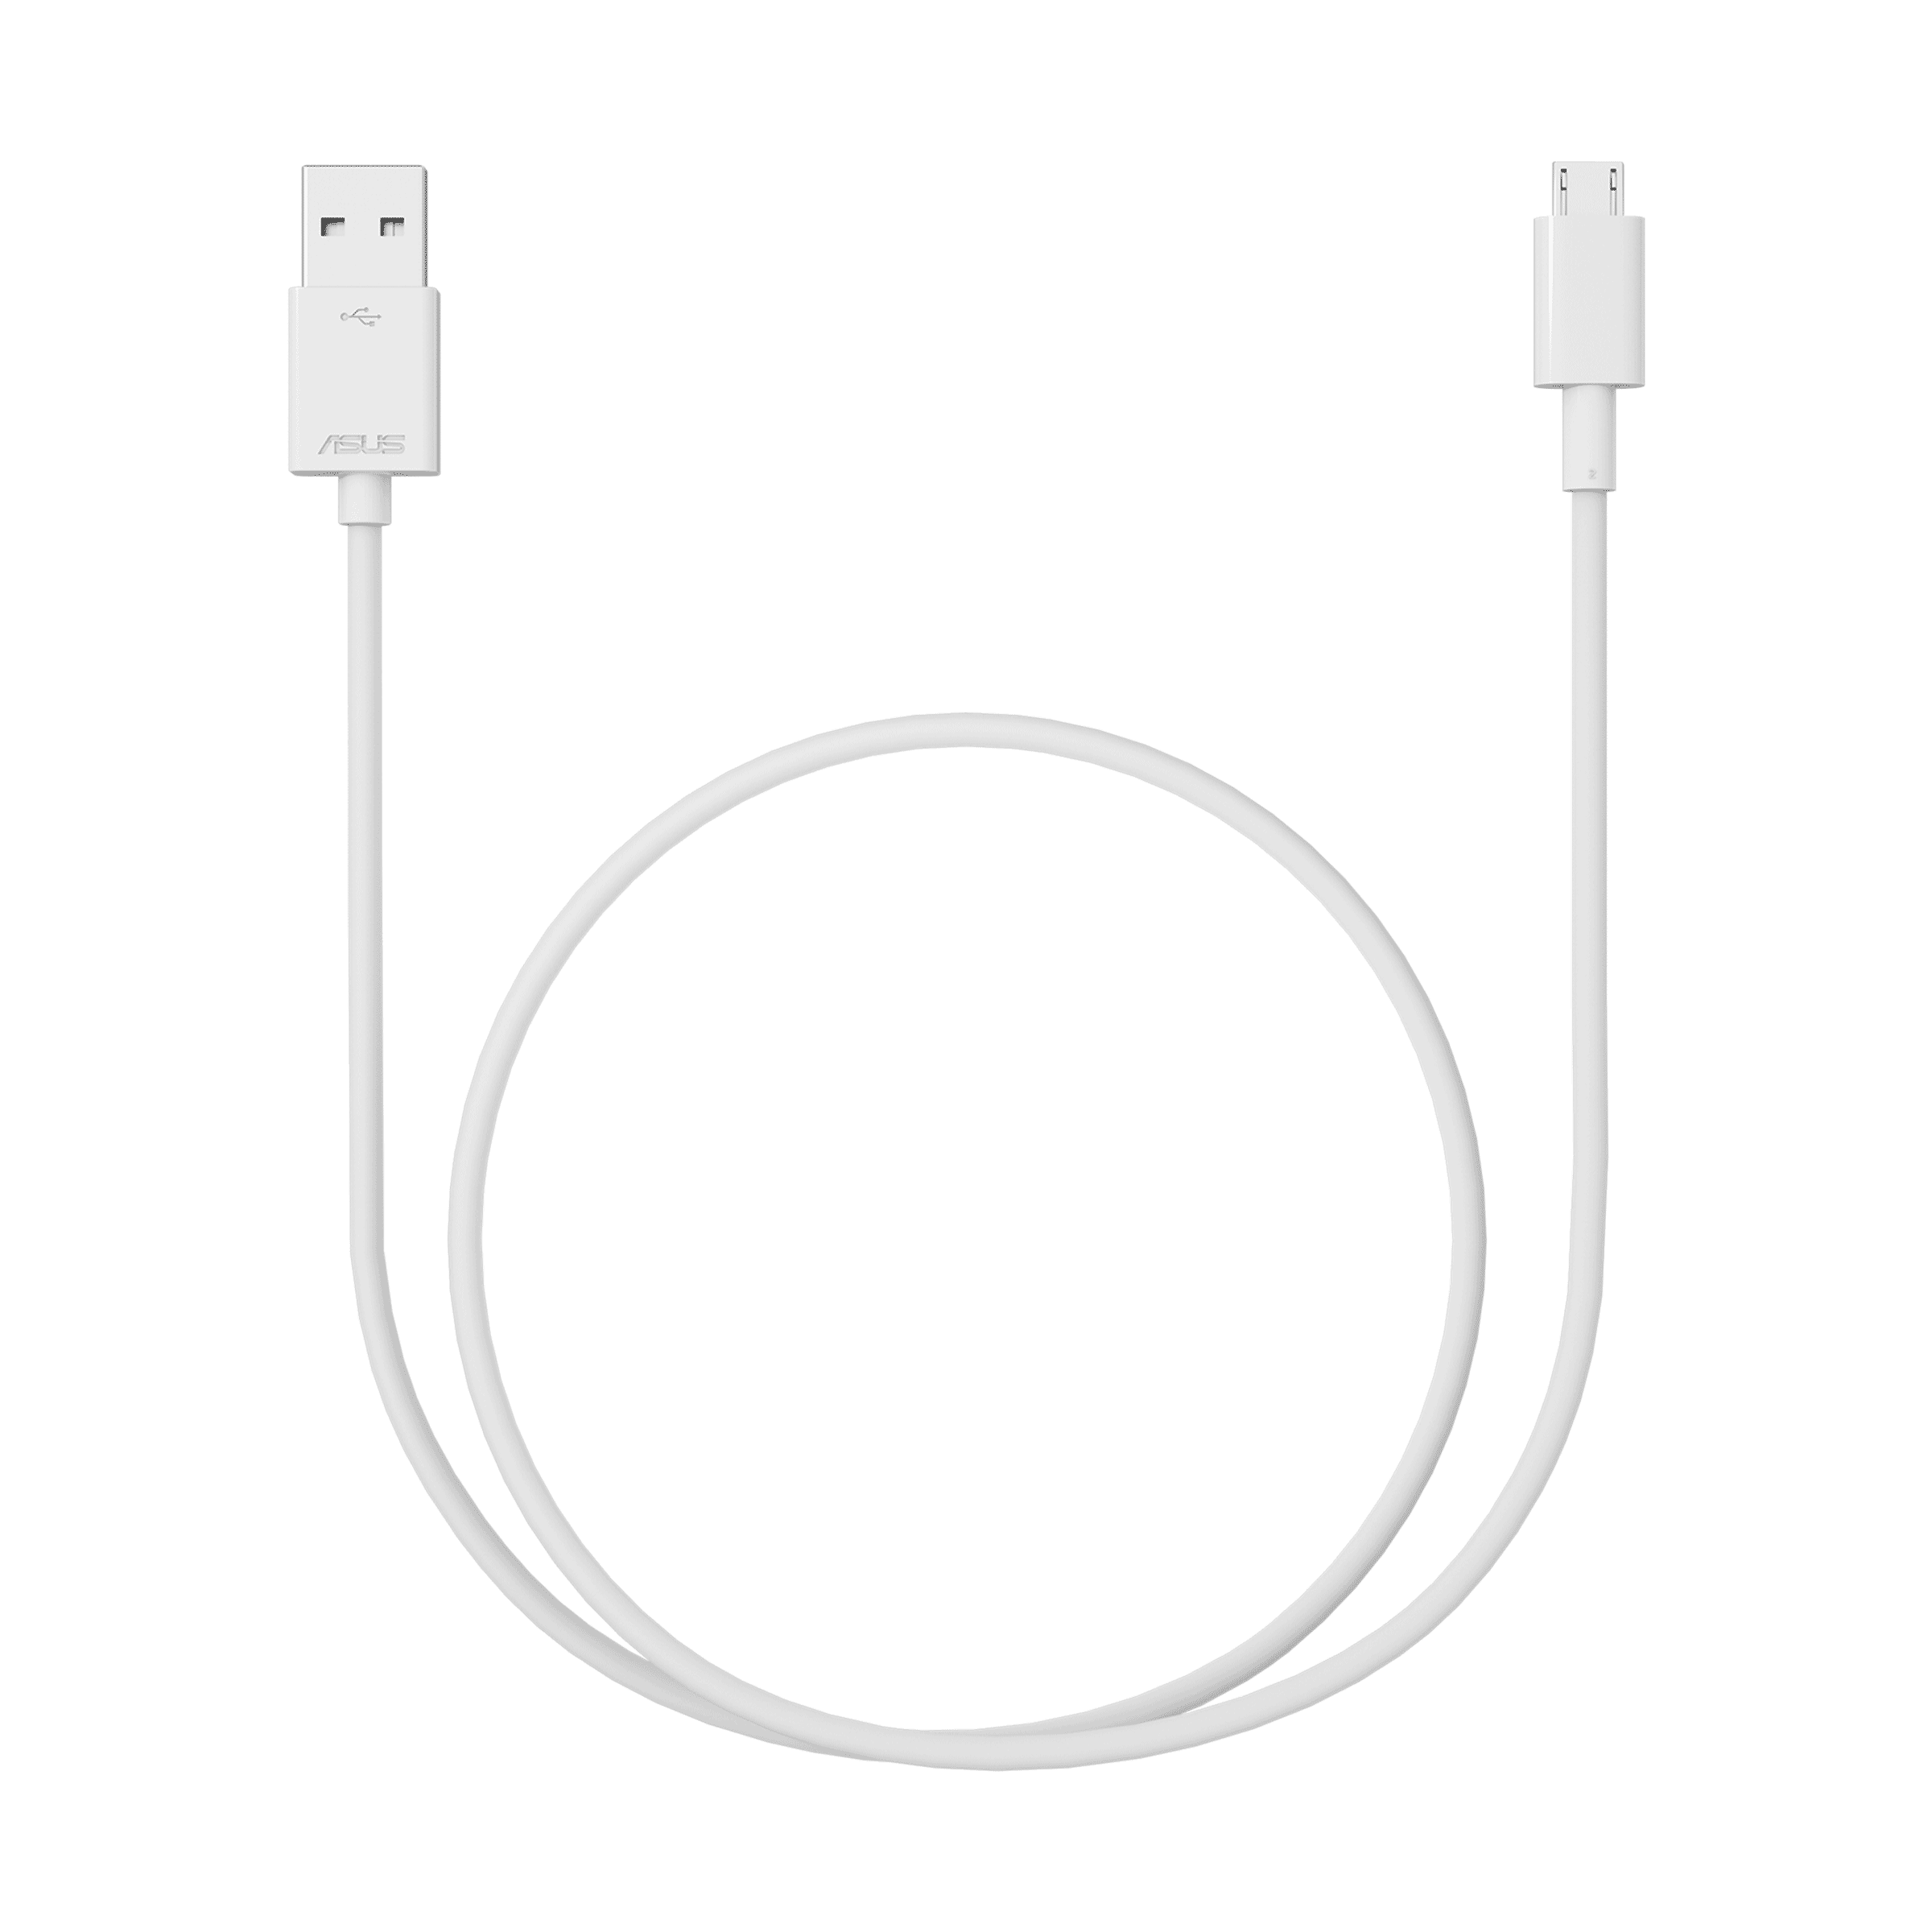 tekort Guggenheim Museum Slecht ASUS Micro-USB Cable｜Docks Dongles and Cable｜ASUS Global